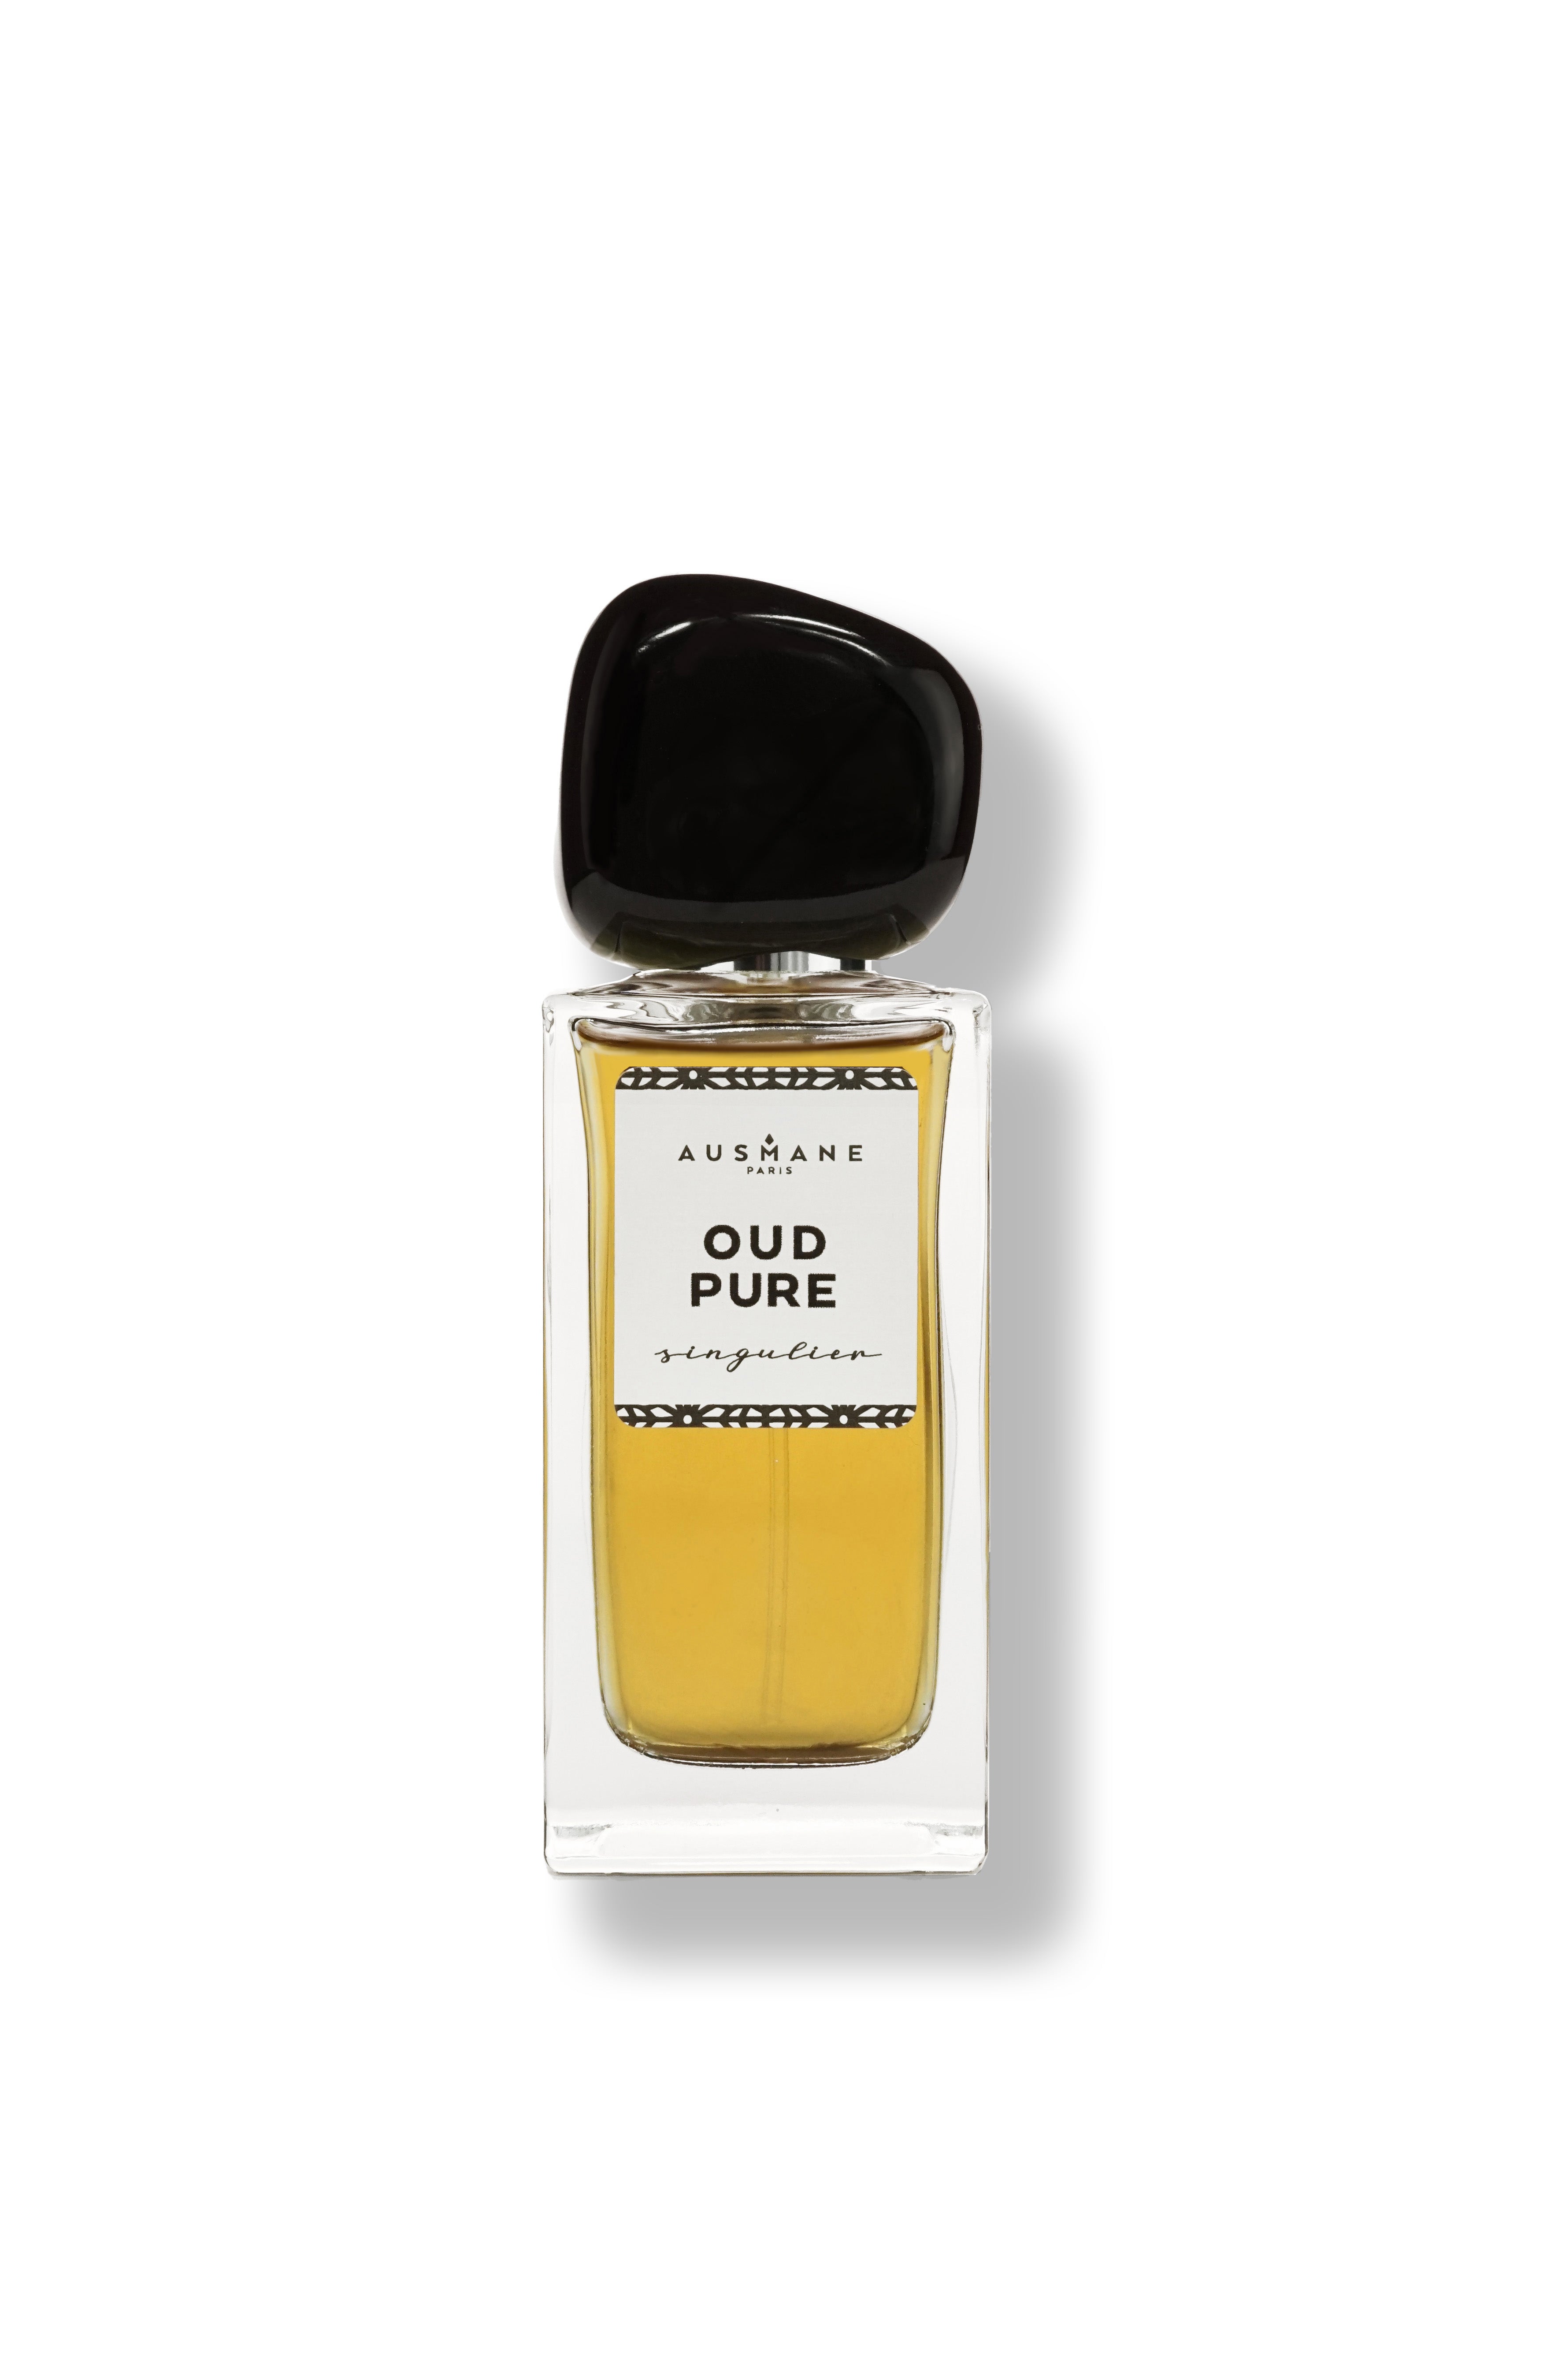 OUD PURE